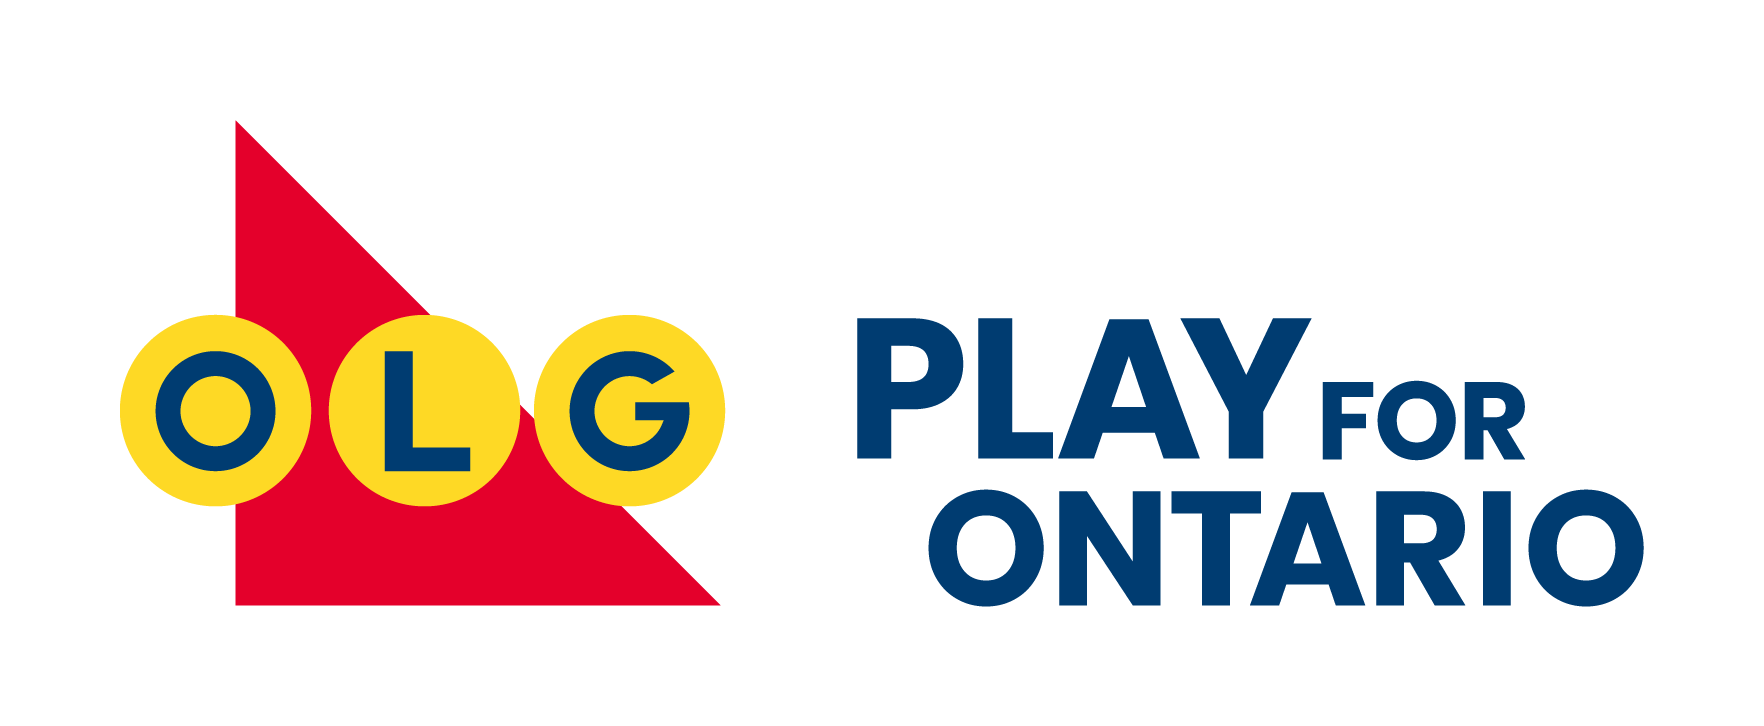 A logo for olg play for ontario is shown on a white background.